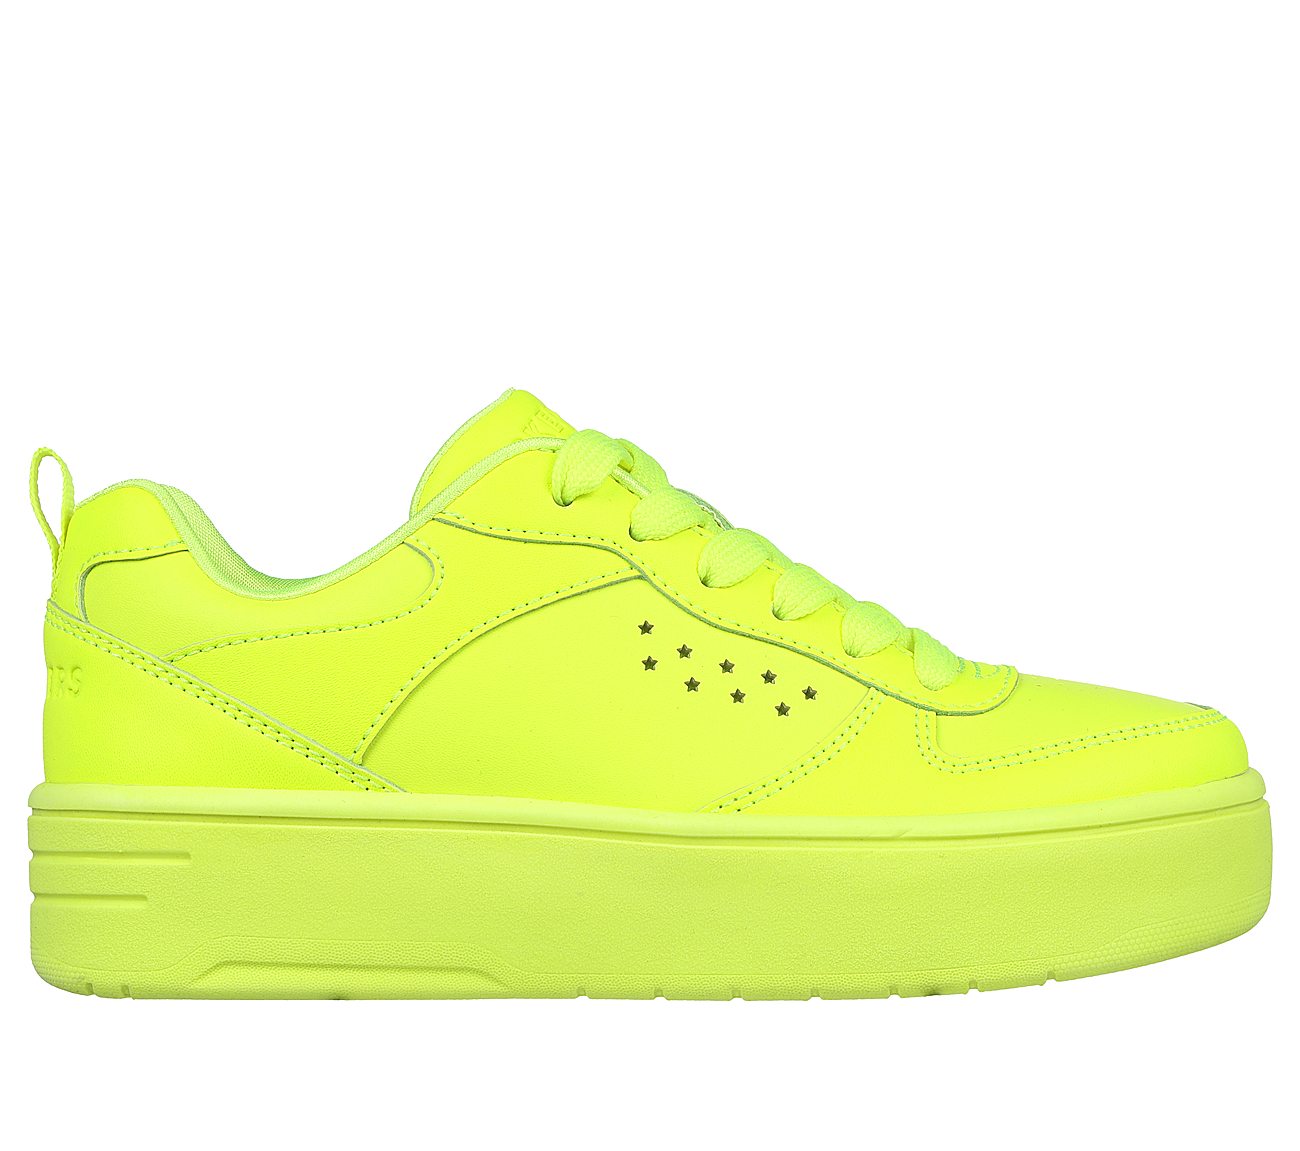 COURT HIGH - COLOR ZONE, NEON/YELLOW Footwear Lateral View